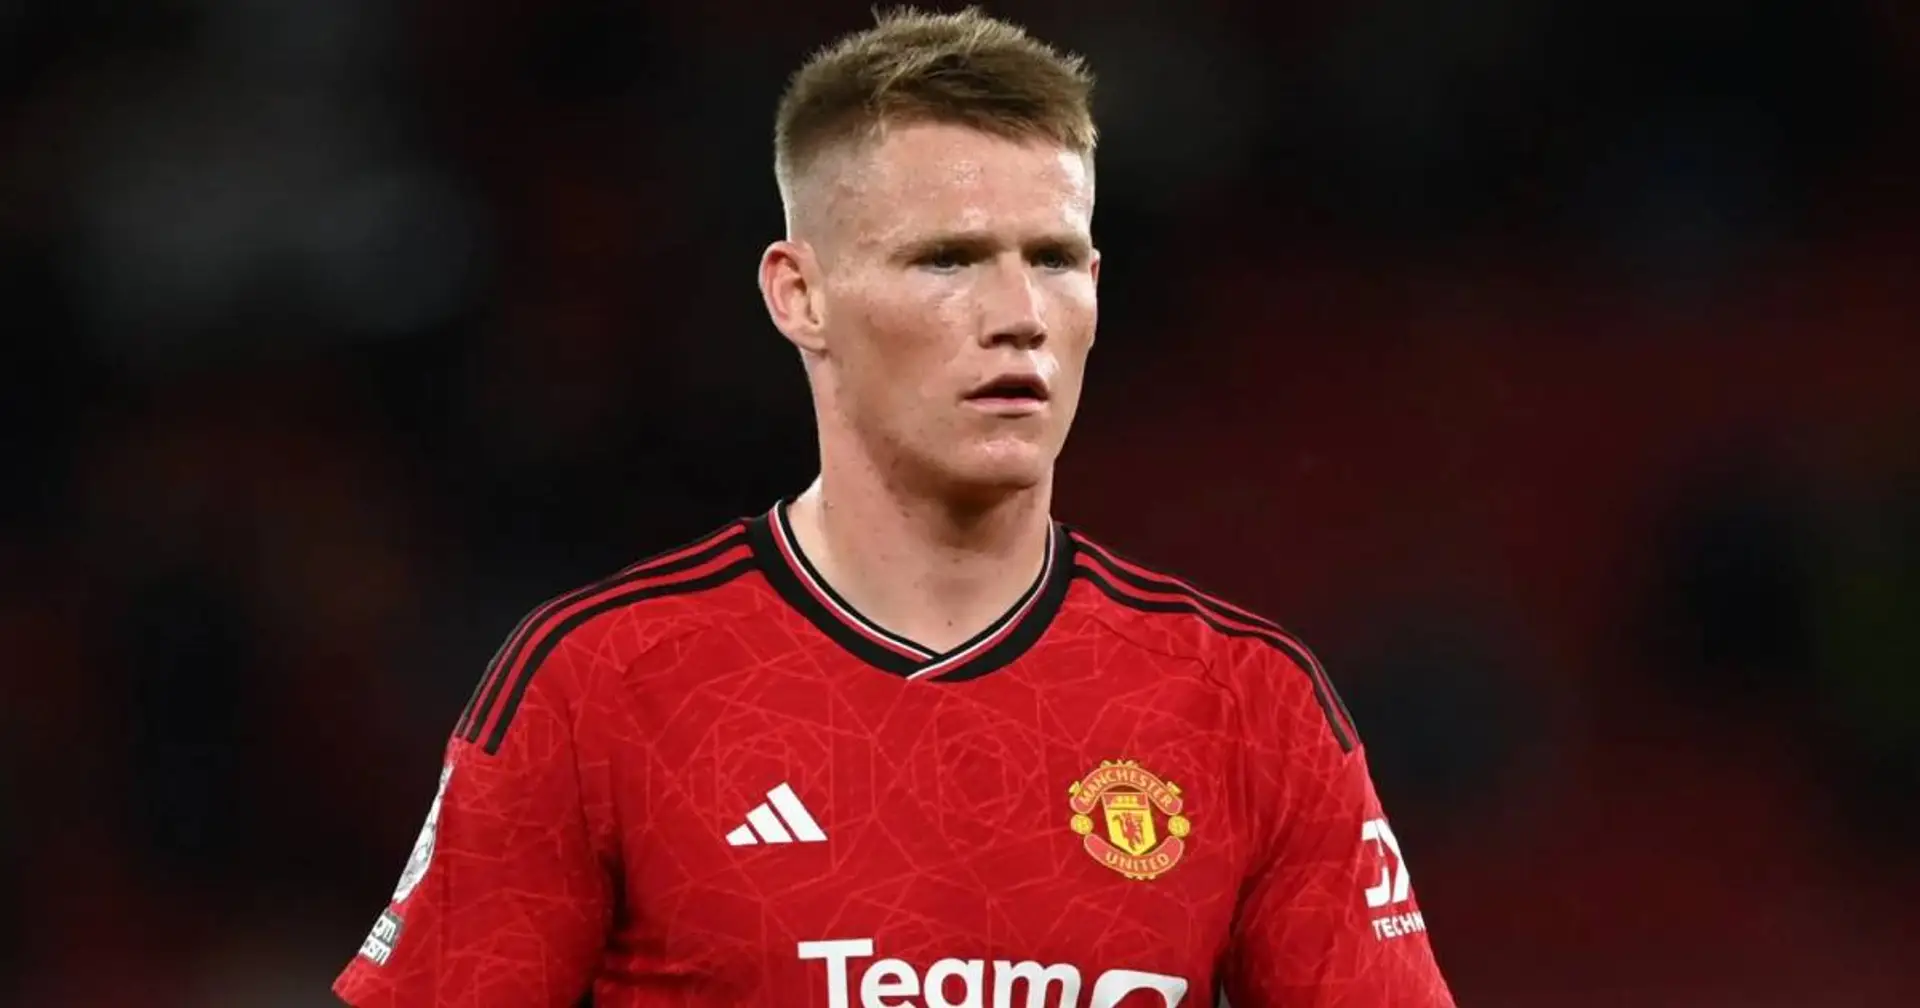 Scott McTominay 'remains high' on Fulham's list of transfer targets (reliability: 4 stars)